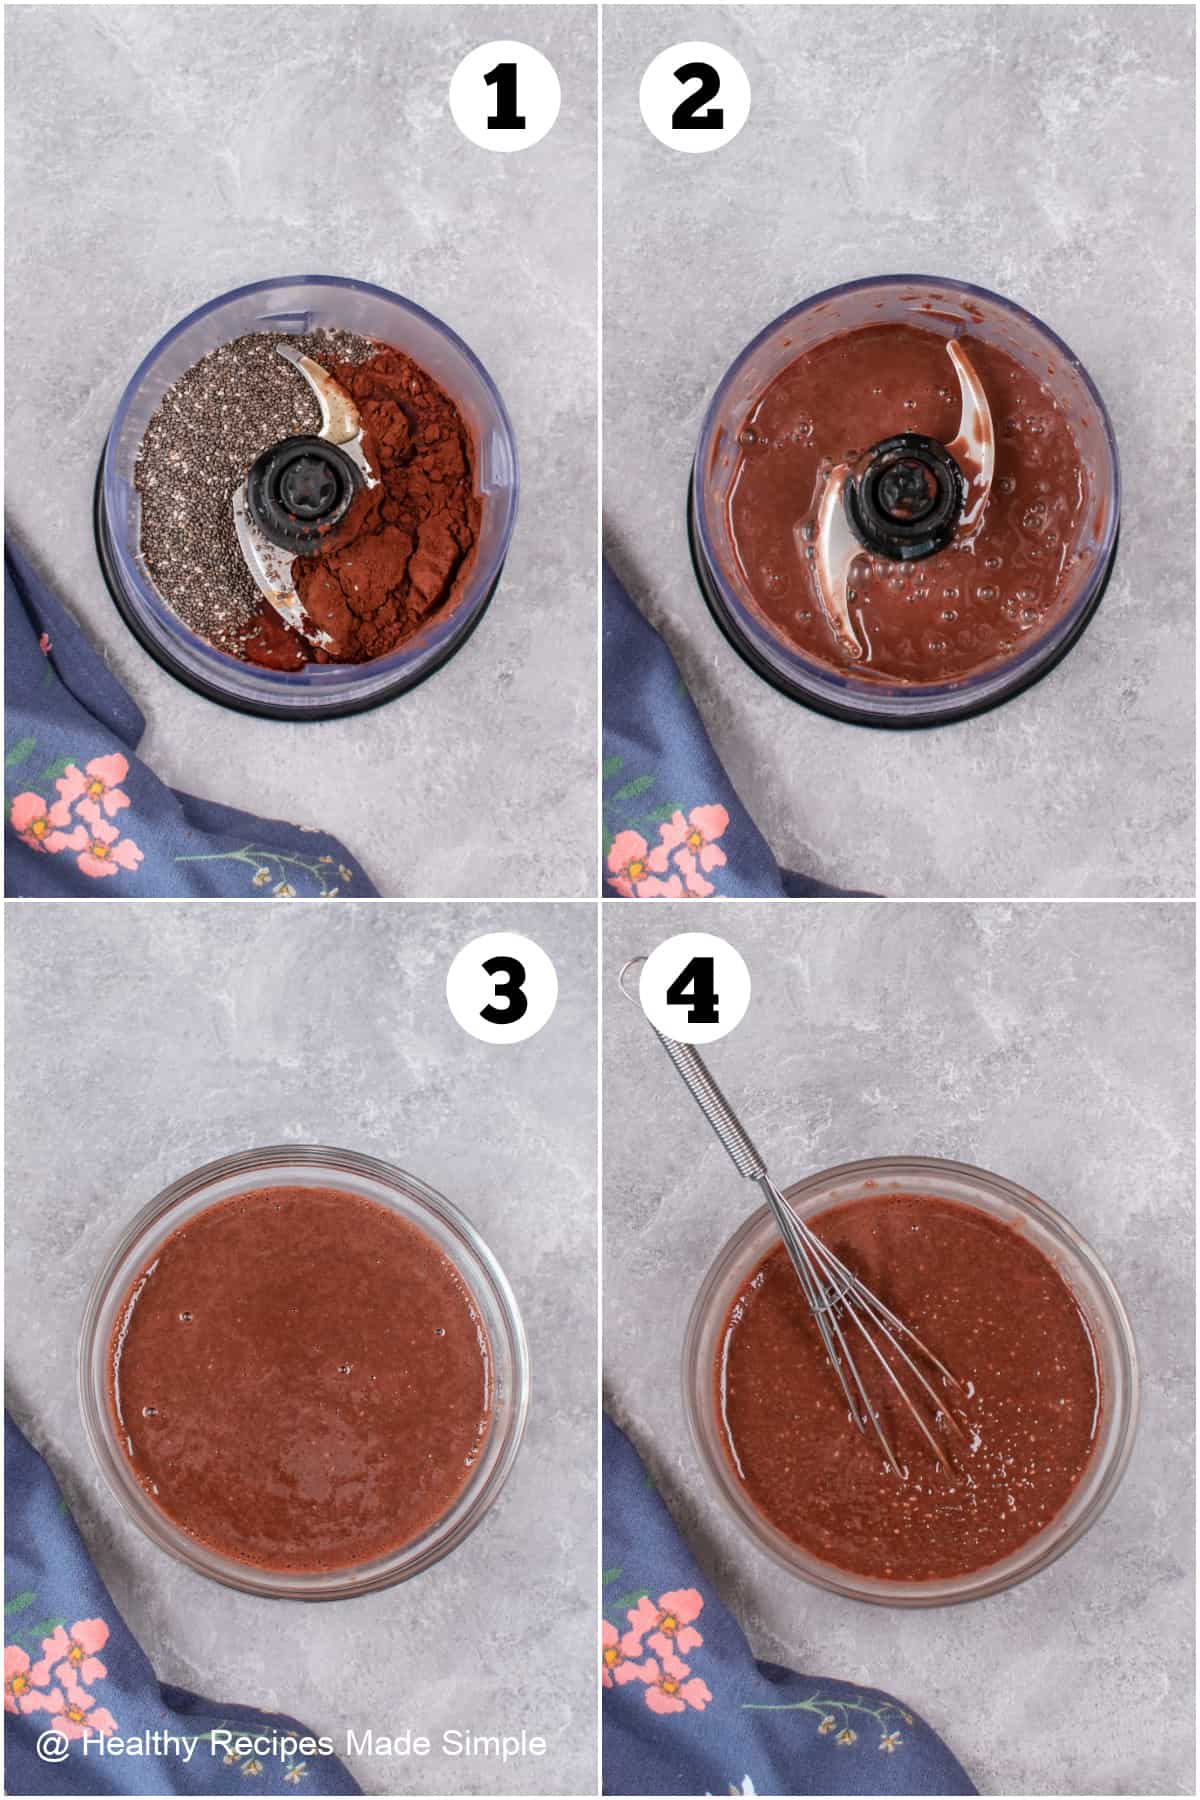 4 pictures showing how to make Chocolate Chia Pudding.